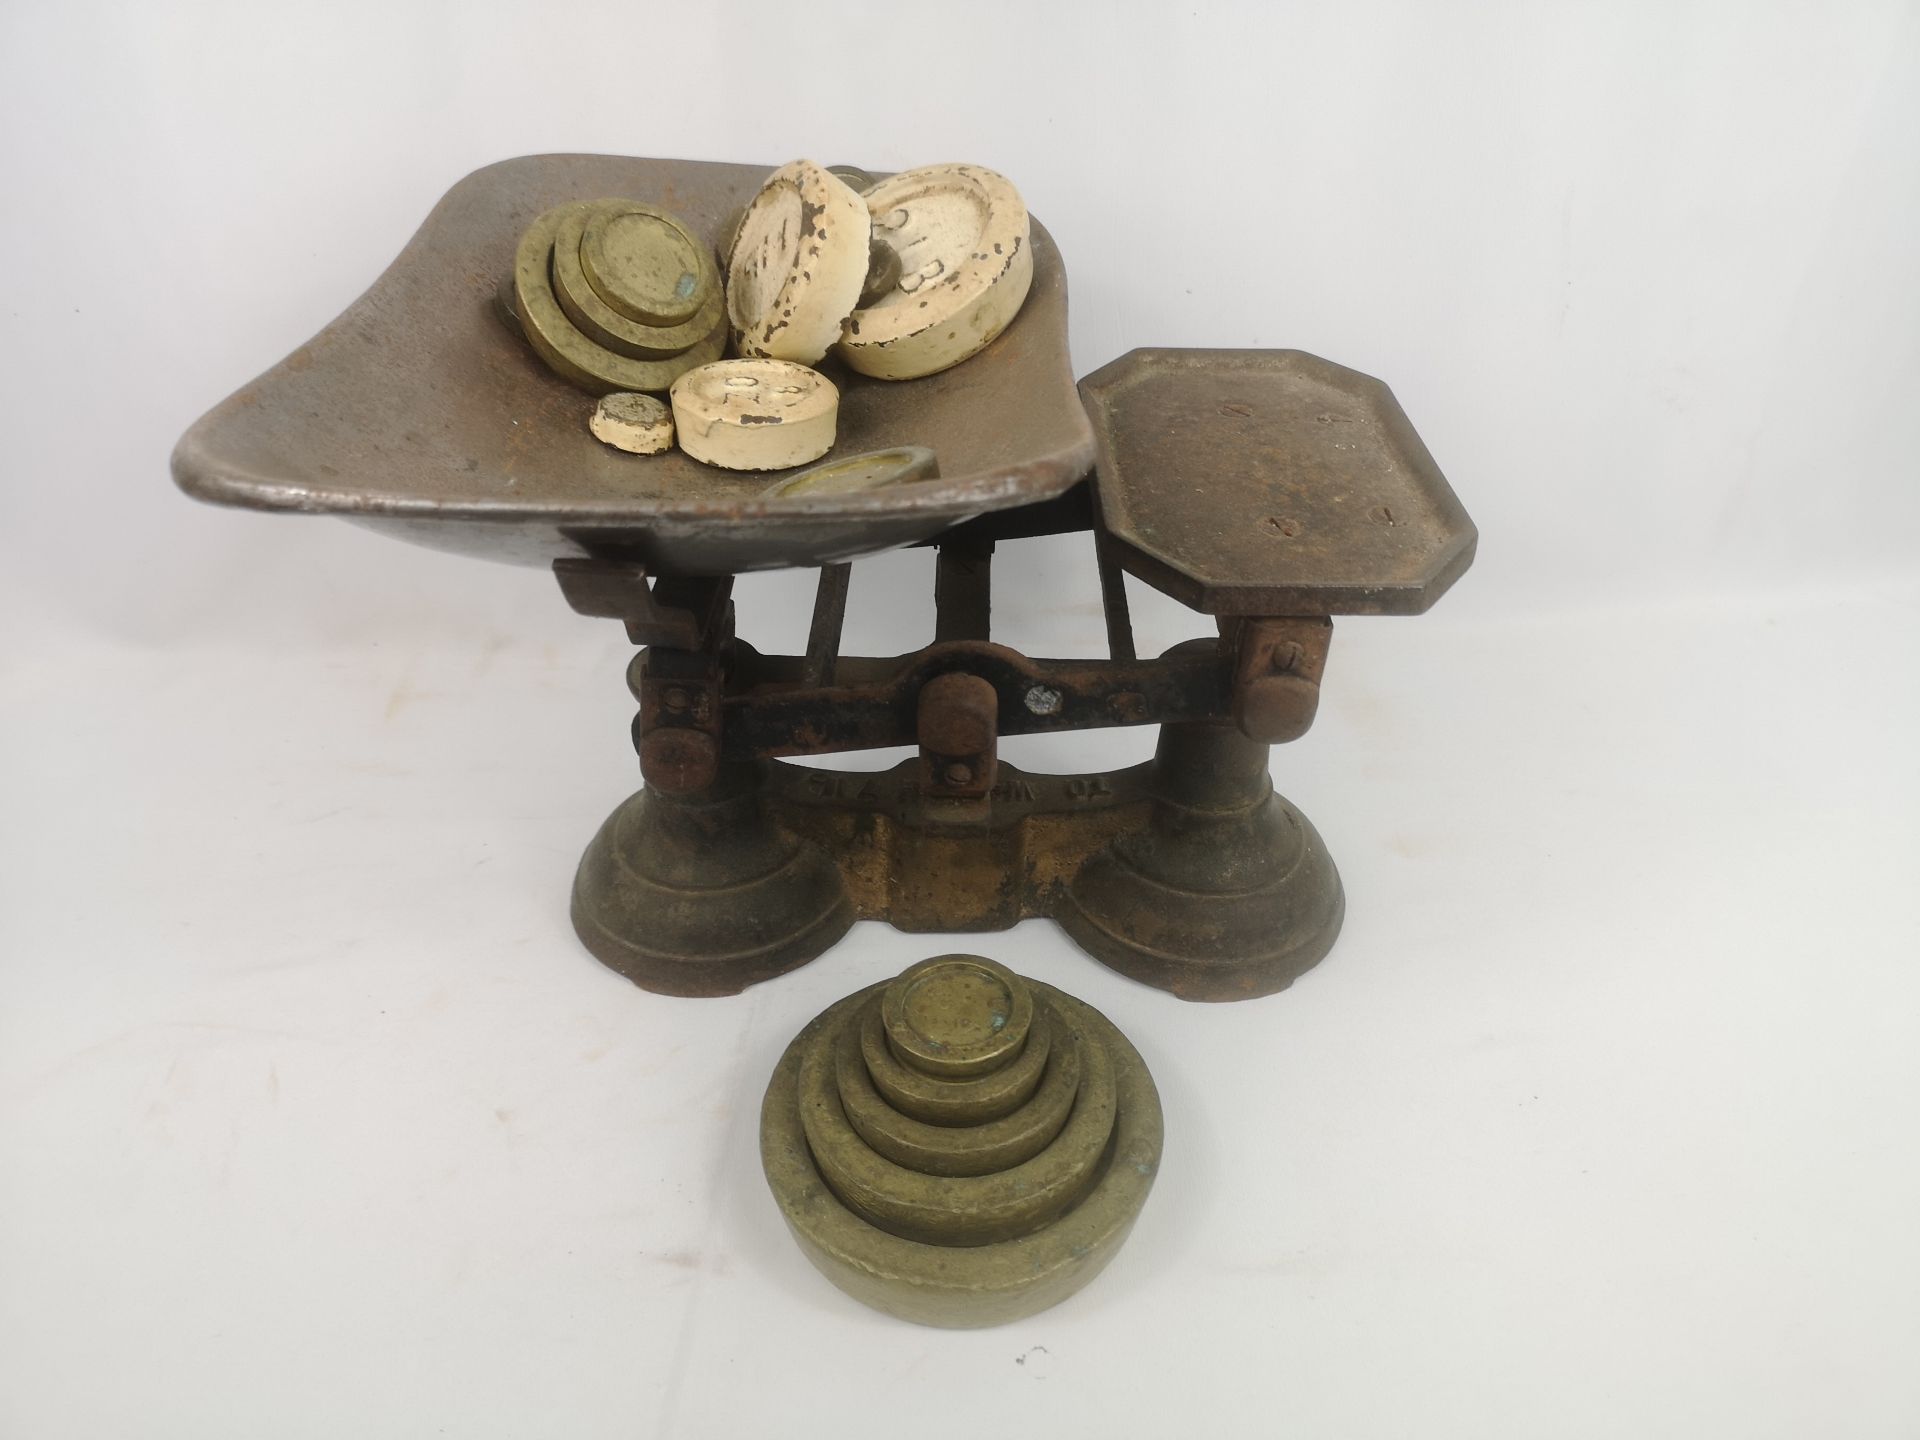 Cast iron weighing scales